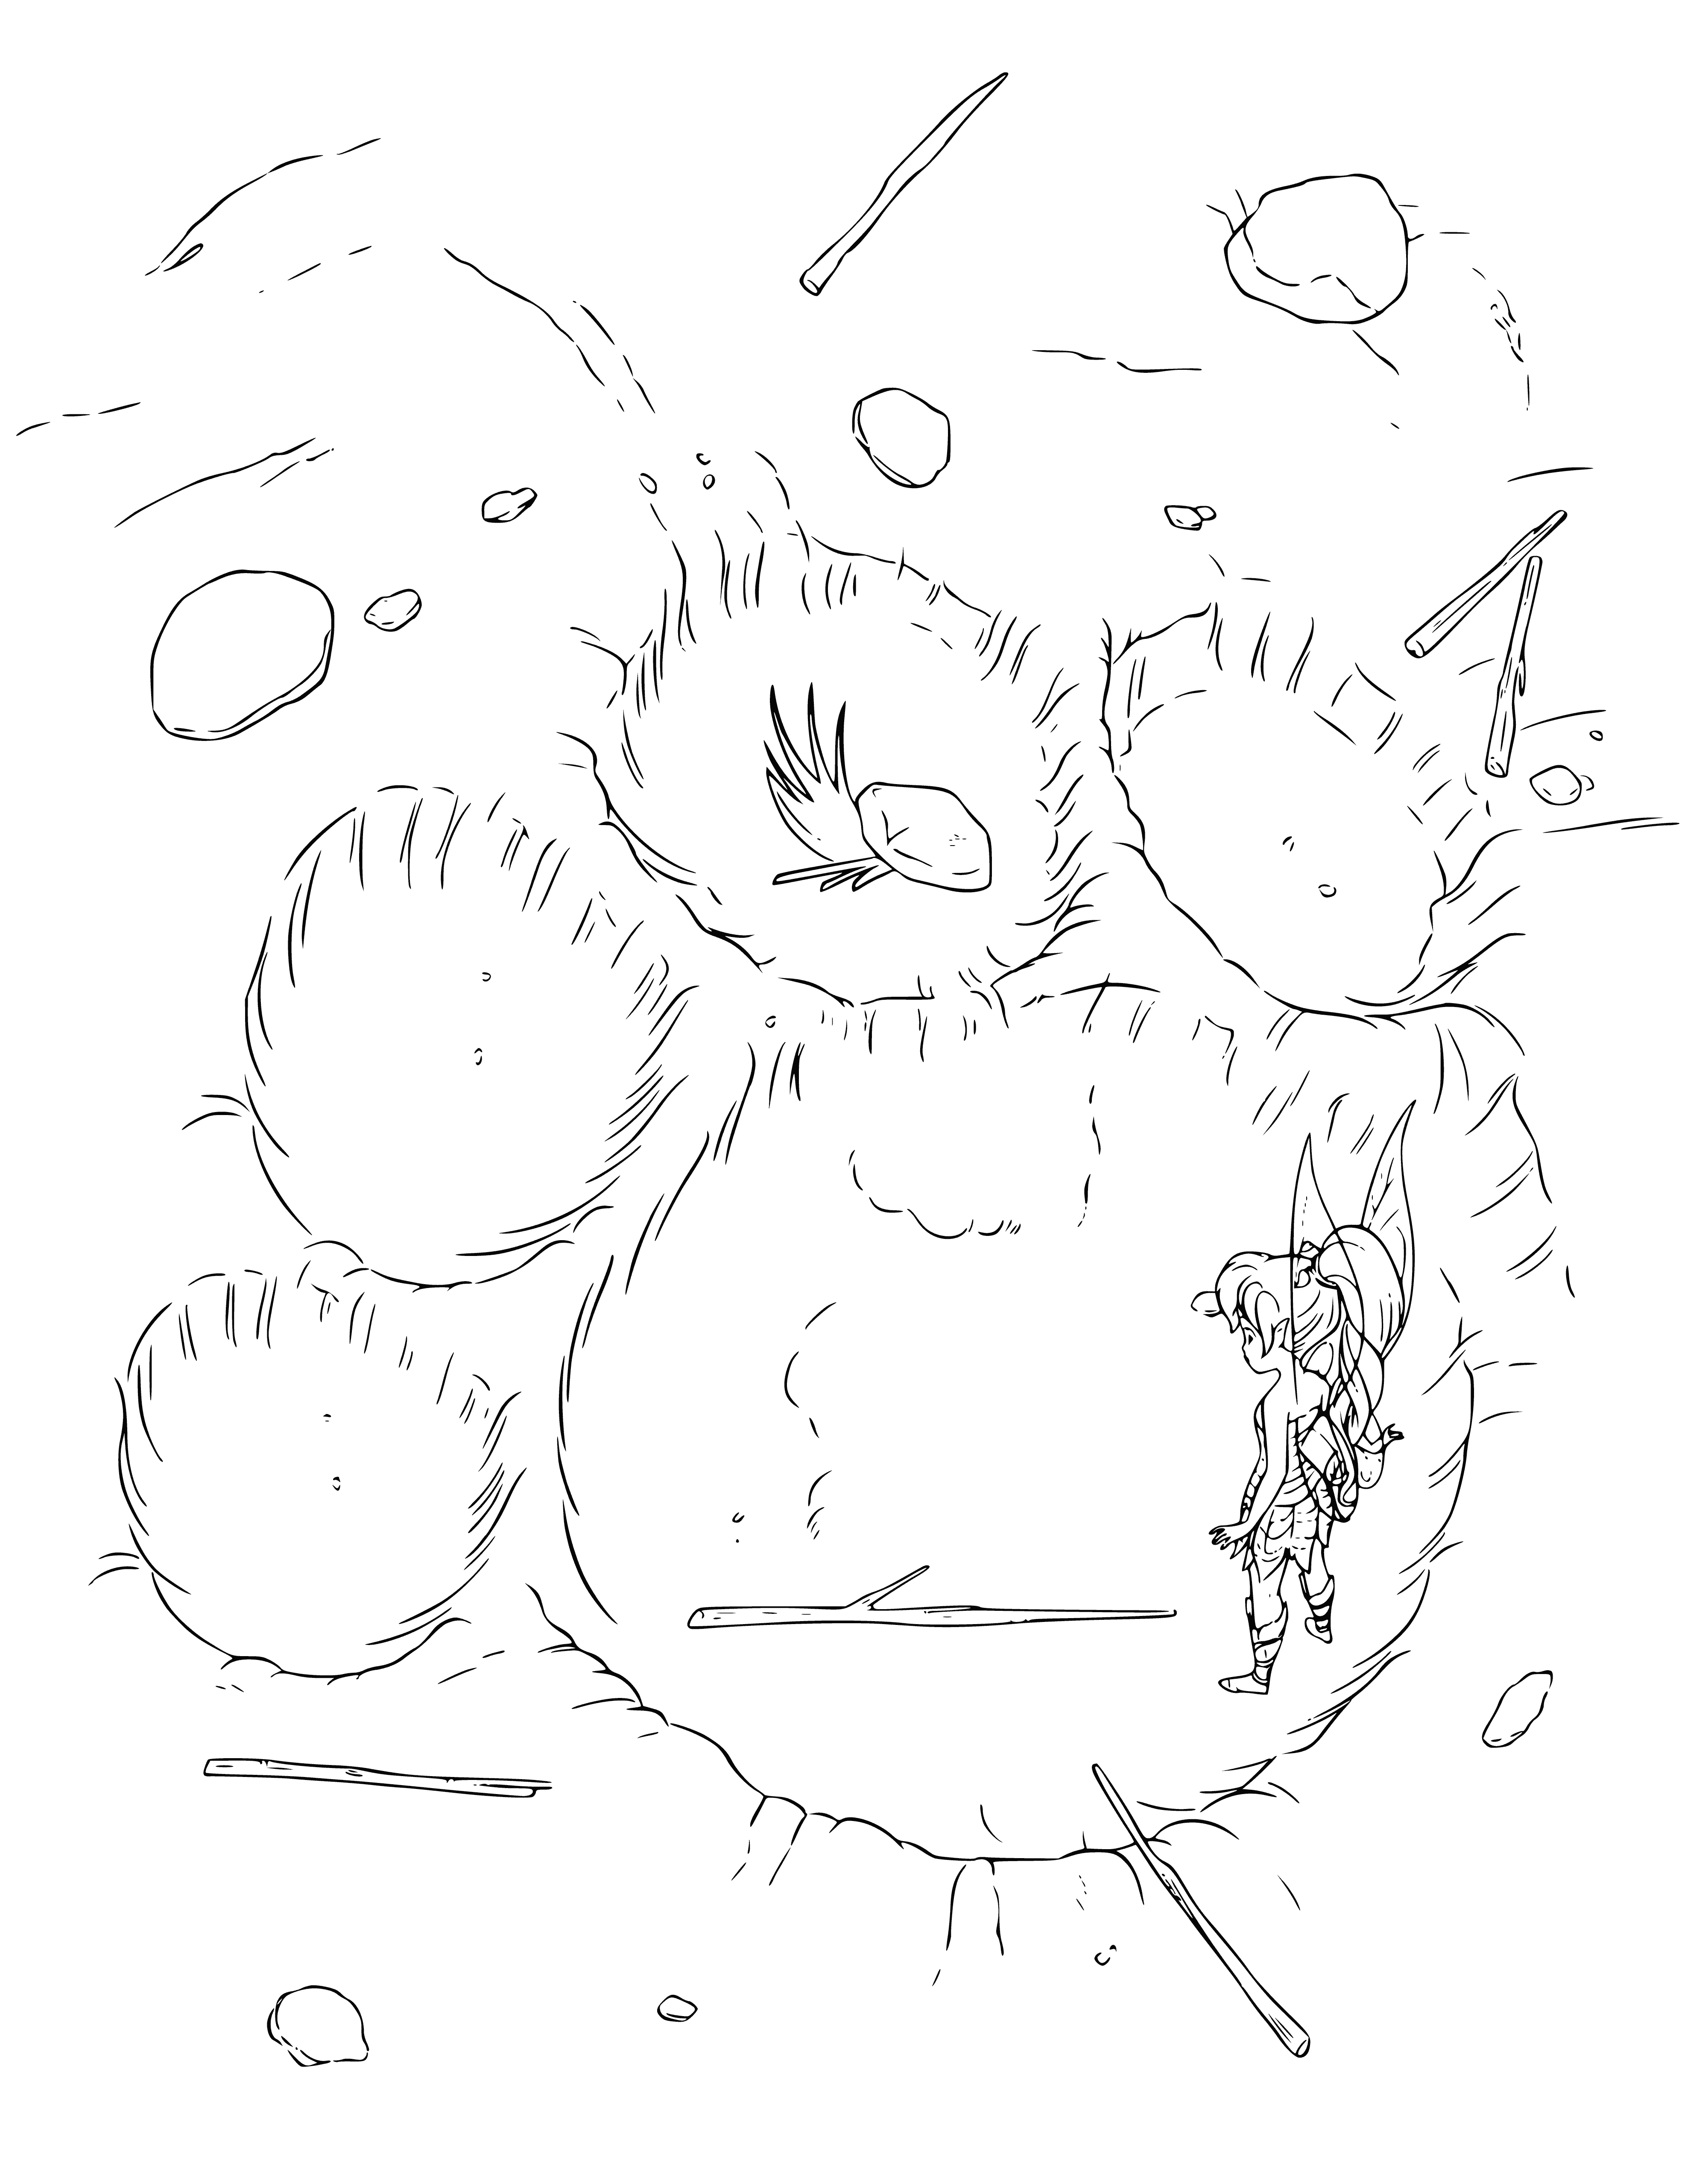 coloring page: Excited fauna found a huge unknown beast in a clearing! With blue fur and horns, she had no fear, but knew she had to be careful.